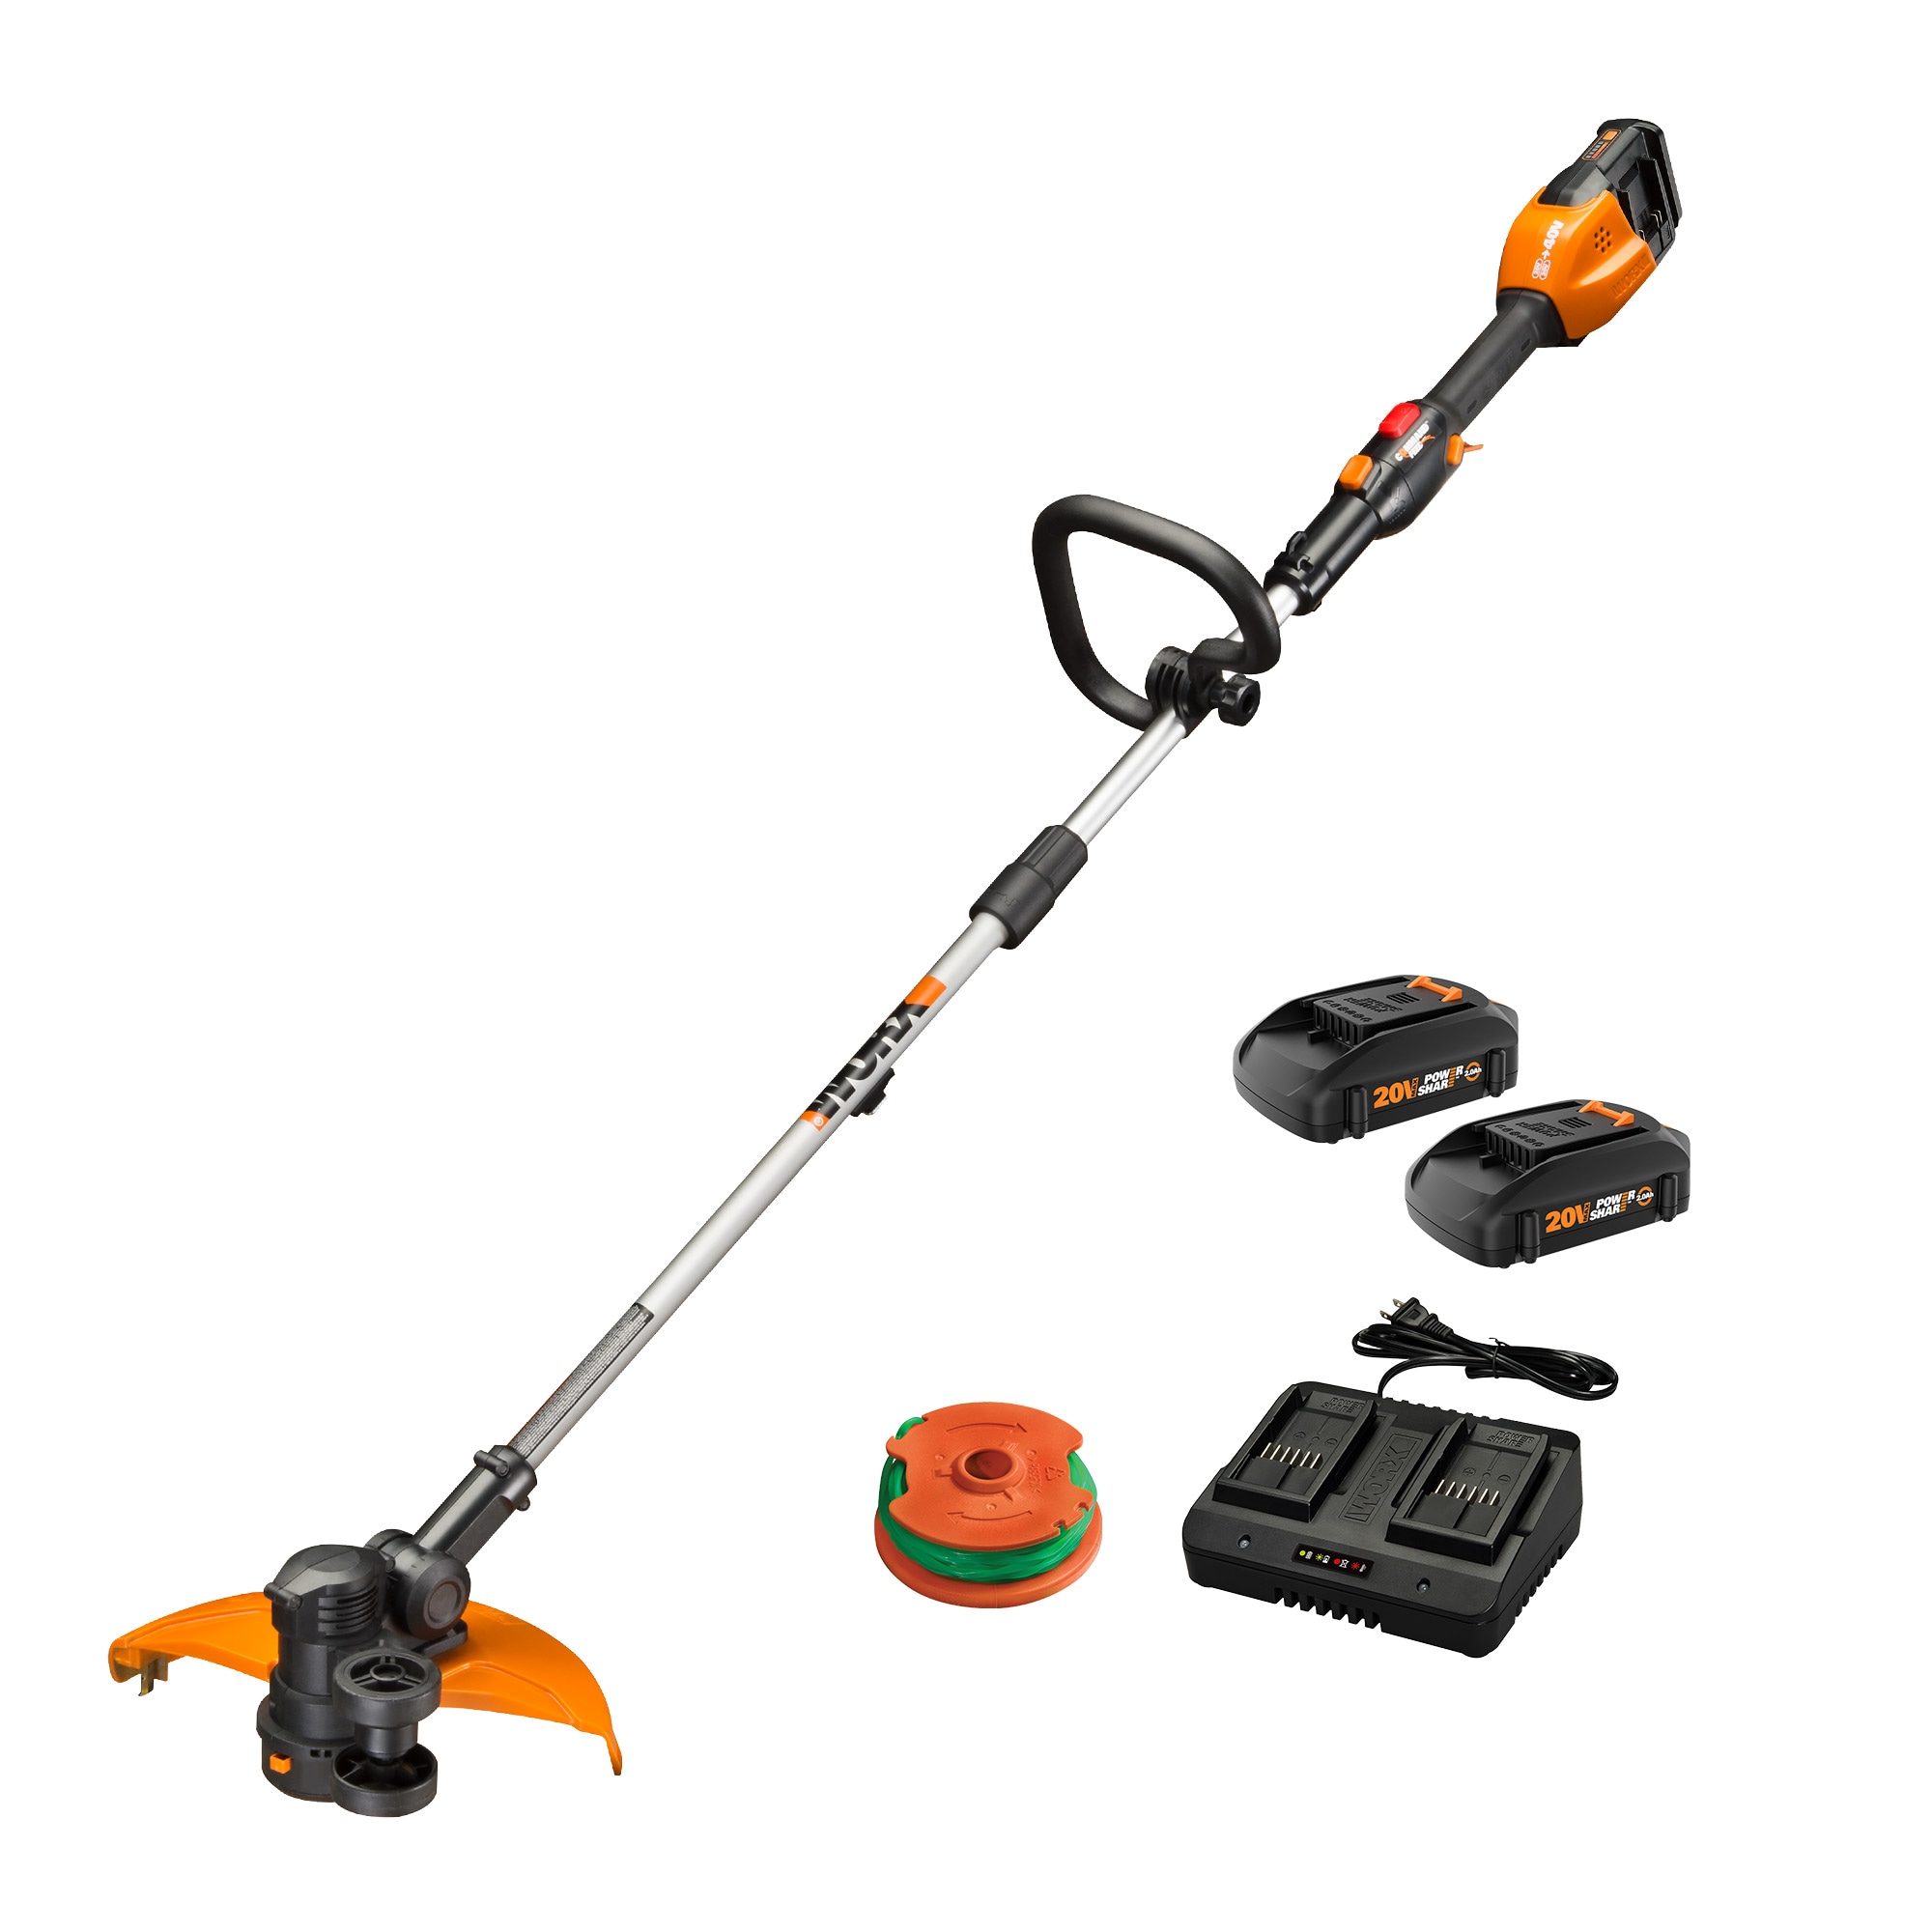 40V Power Share Grass Trimmer and Blower